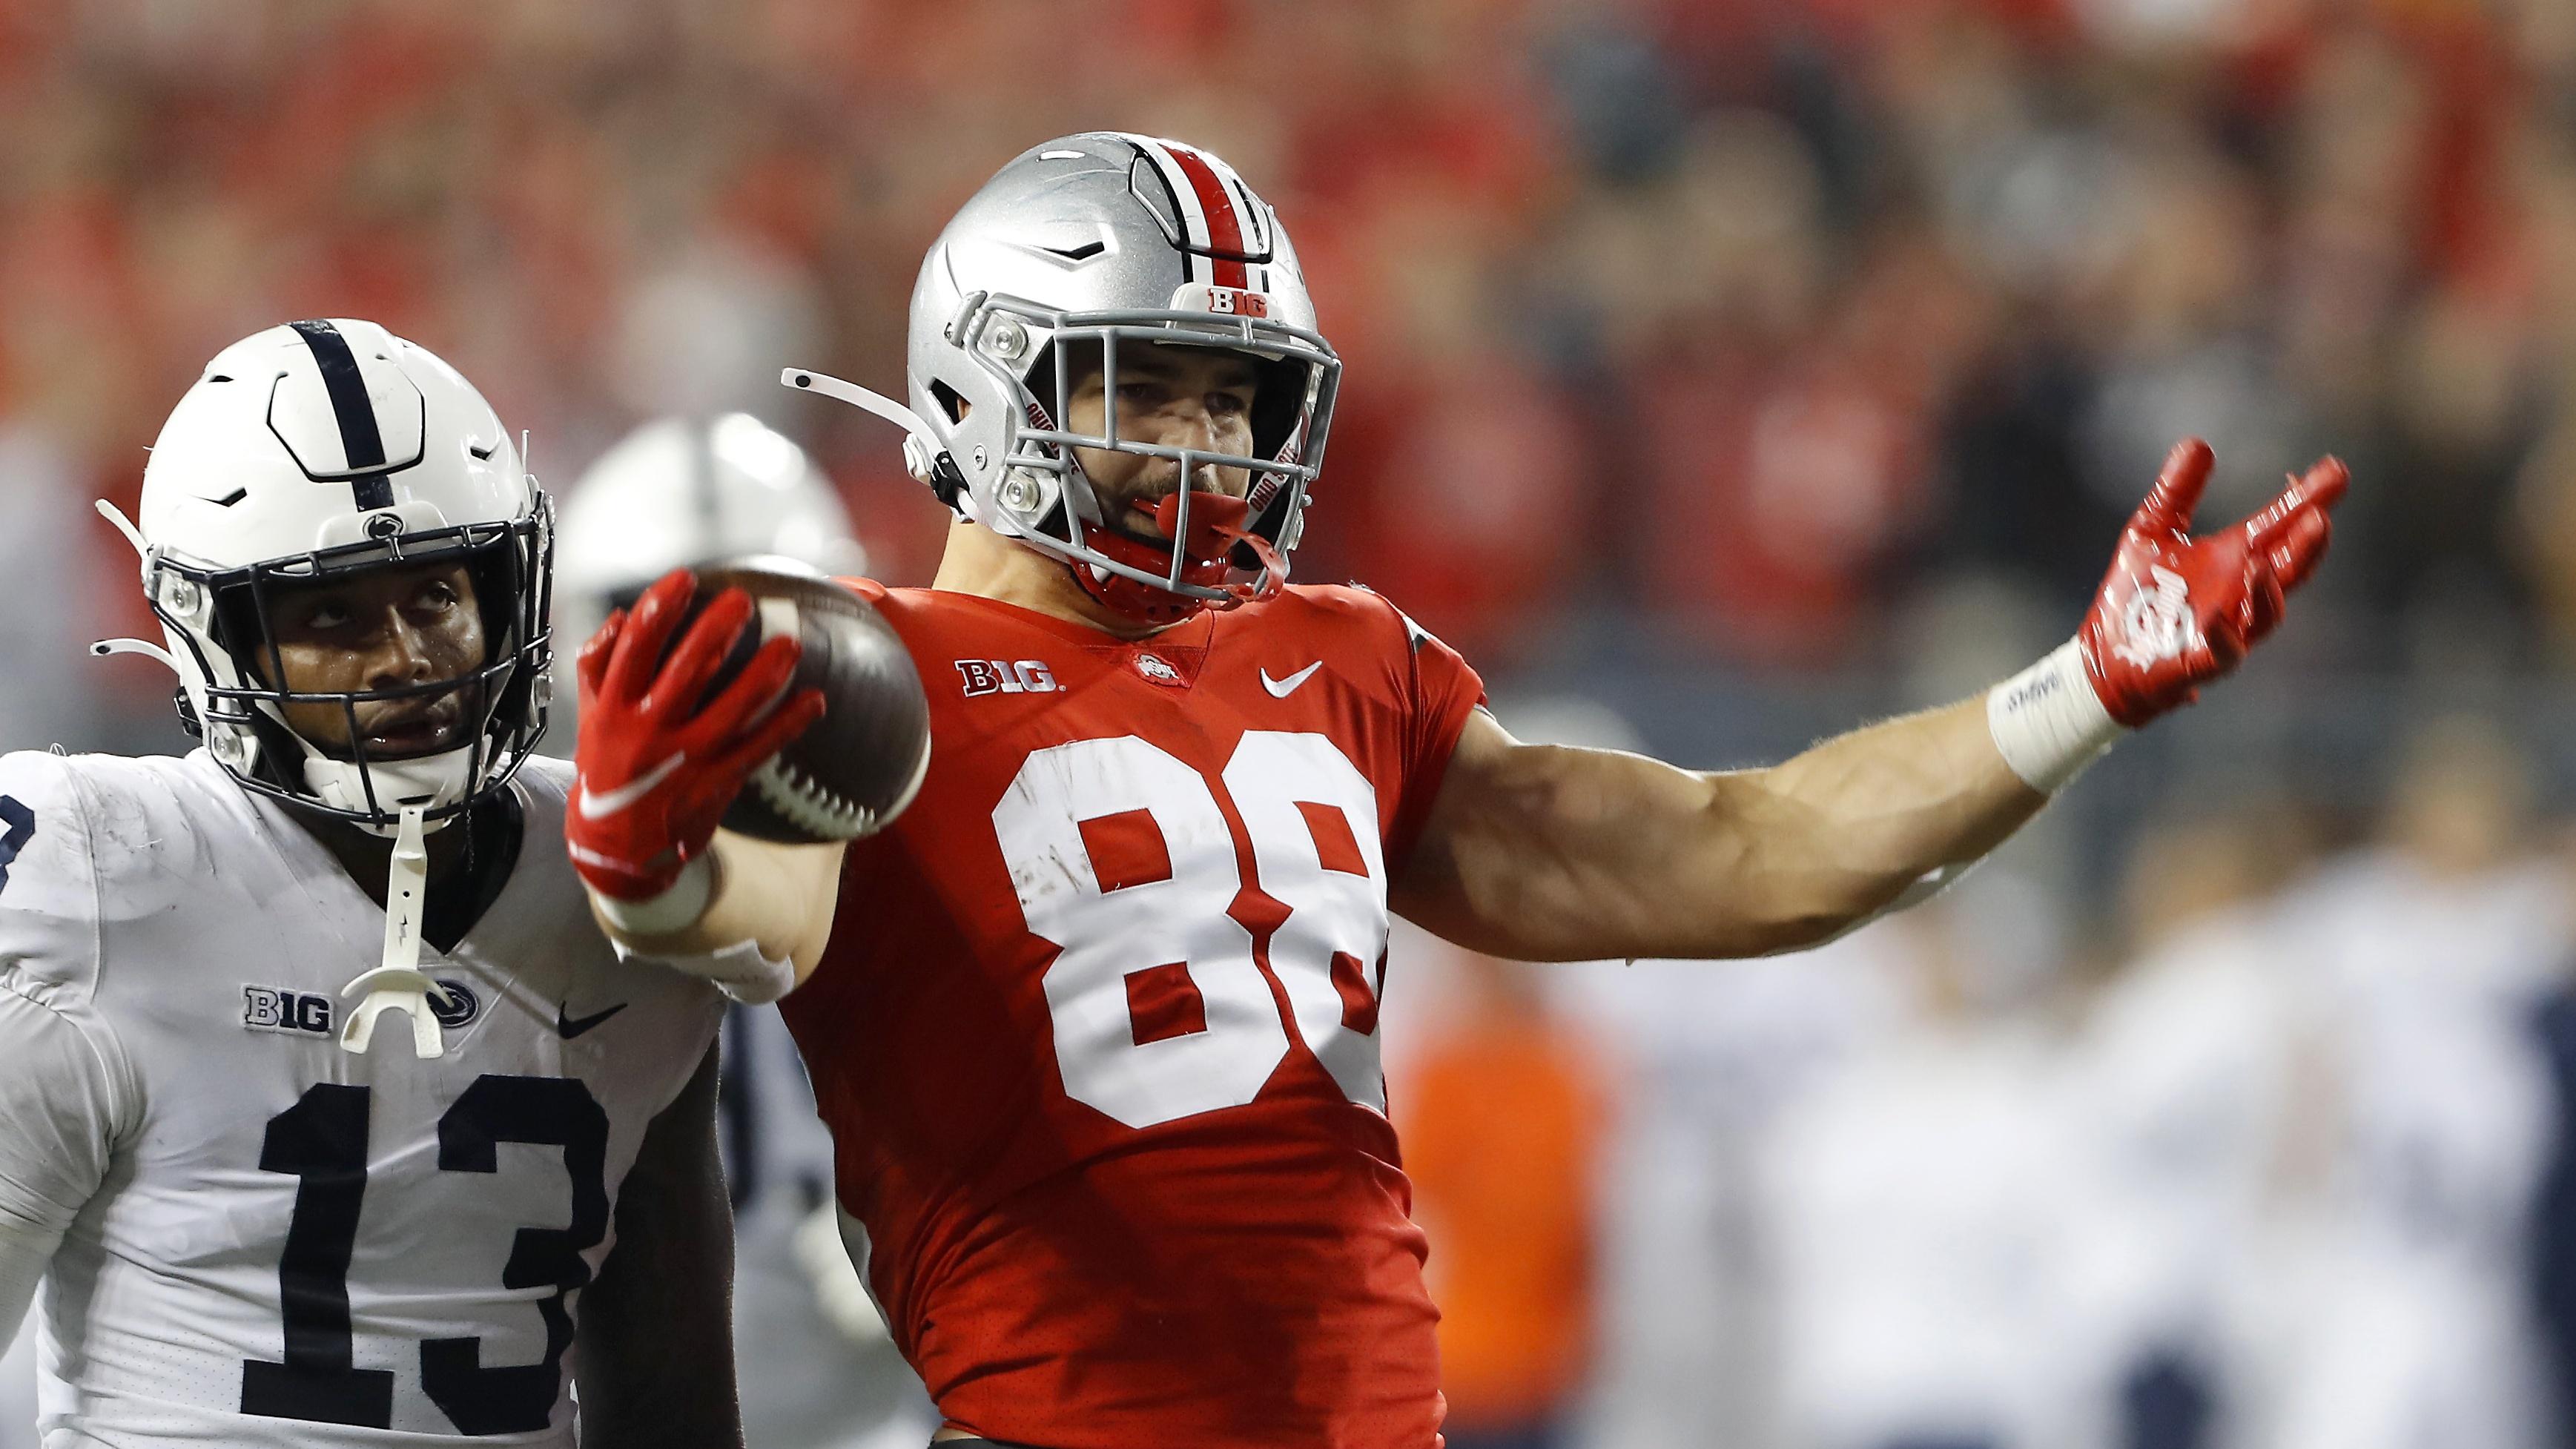 Oct 30, 2021; Columbus, Ohio, USA; Ohio State Buckeyes tight end Jeremy Ruckert (88) celebrates the first down catch in the fourth quarter against the Penn State Nittany Lions at Ohio Stadium. Mandatory Credit: Joseph Maiorana-USA TODAY Sports / © Joseph Maiorana-USA TODAY Sports